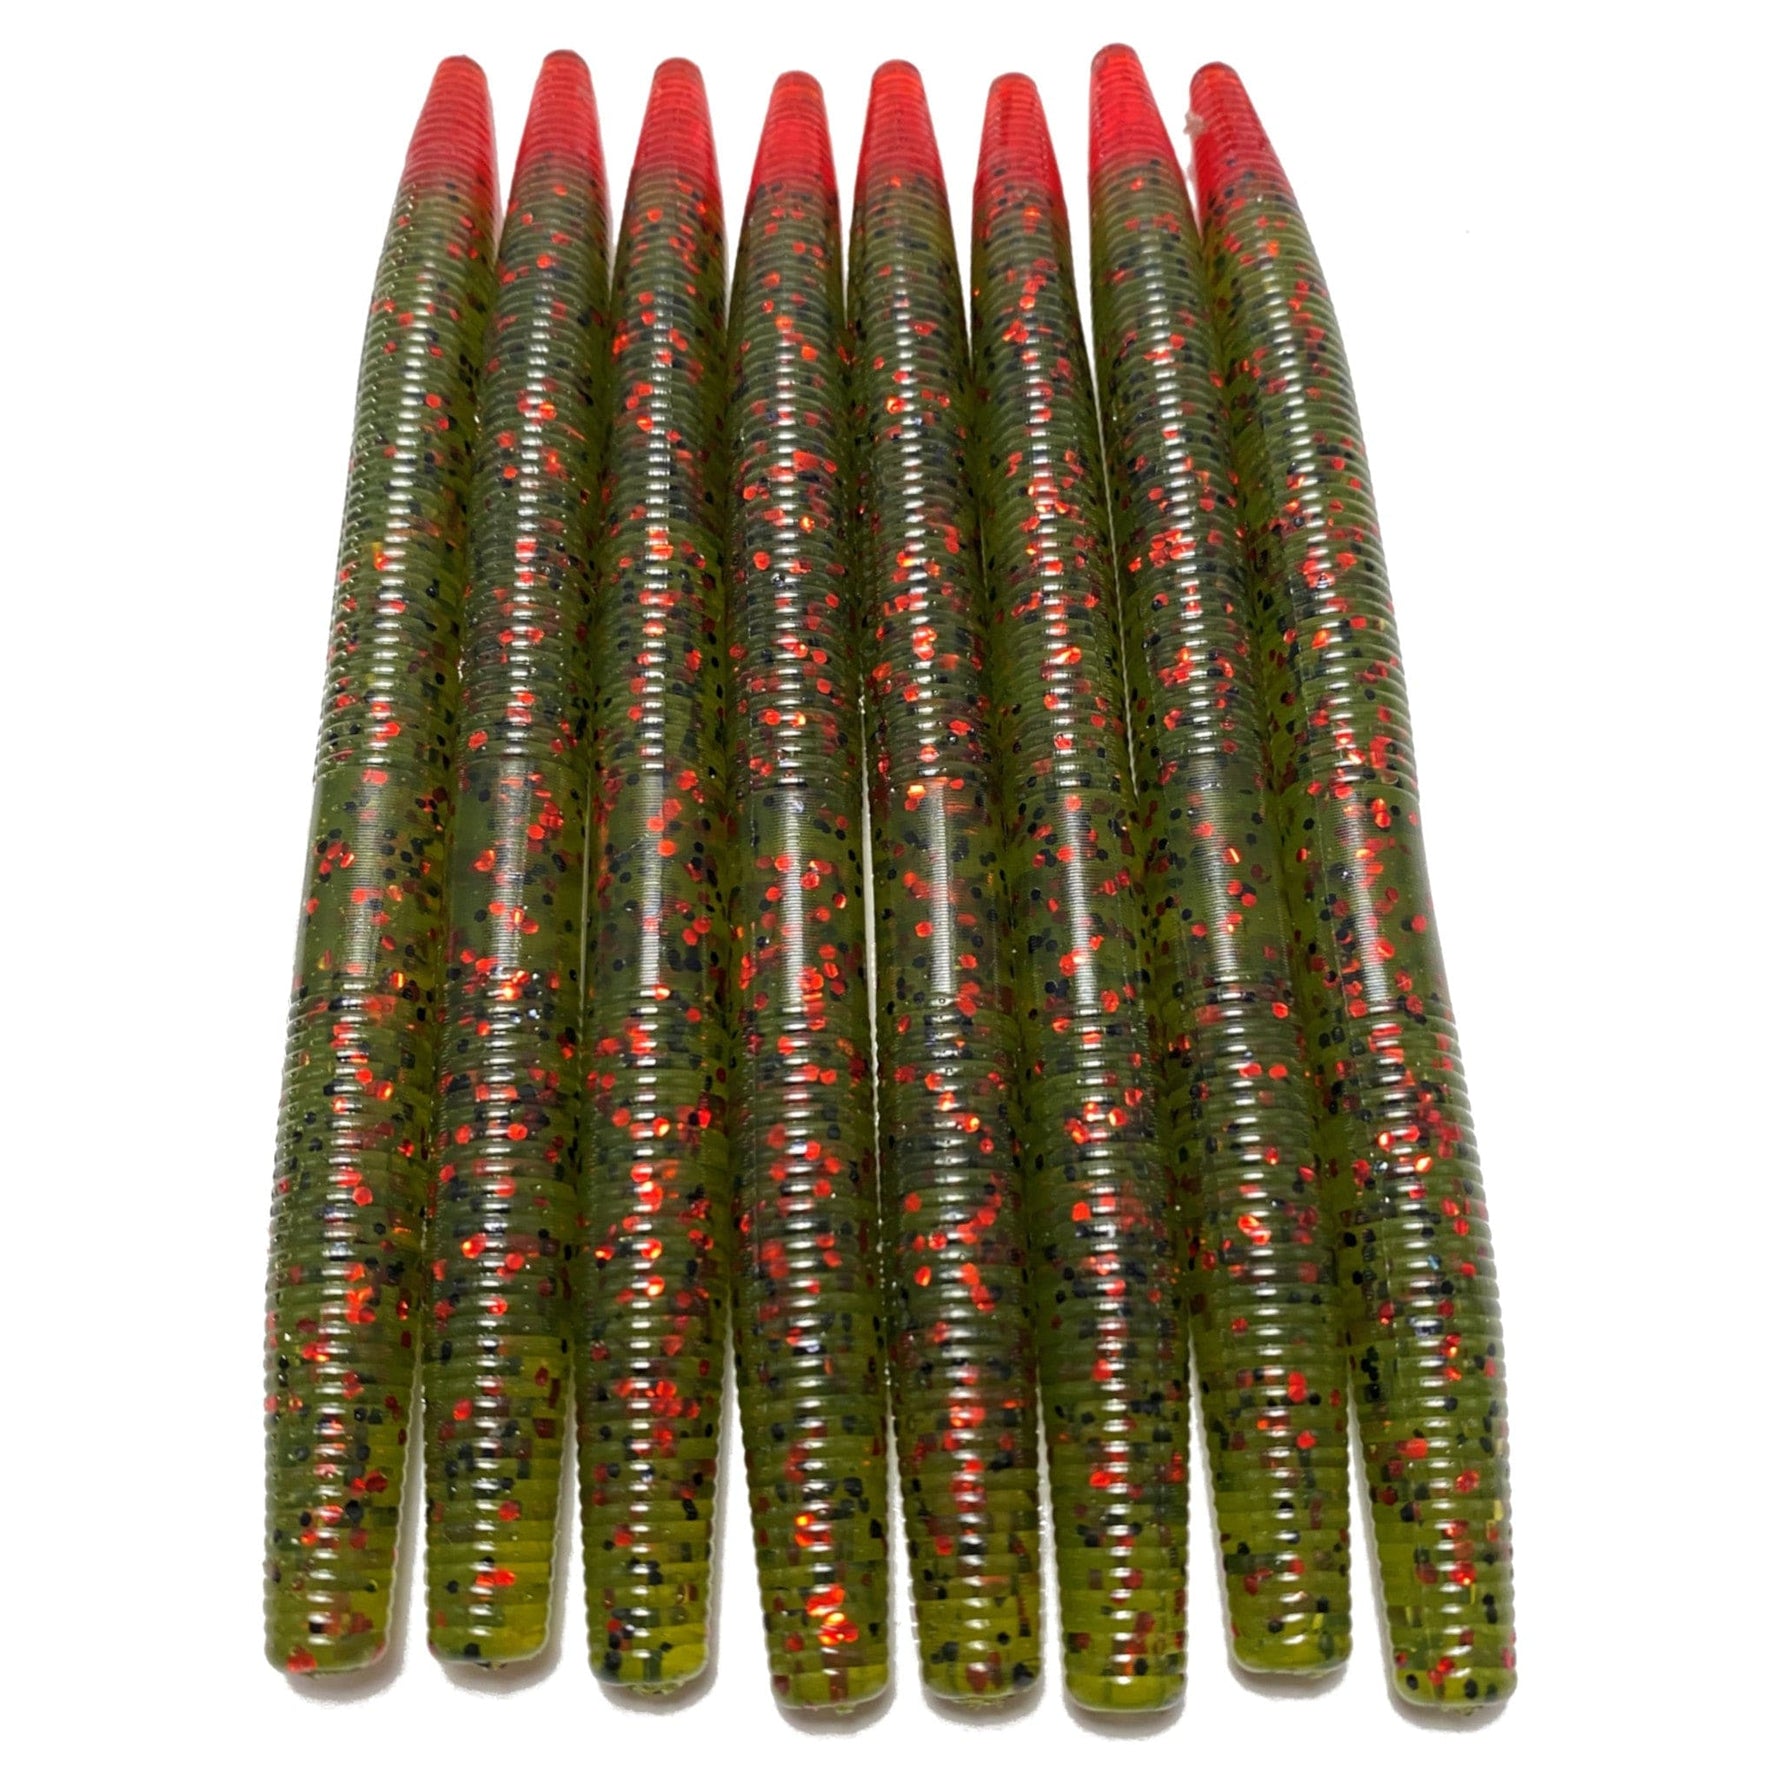 Obee 5 Stick Worm - Watermelon Red Tip – Obee Fishing Co.